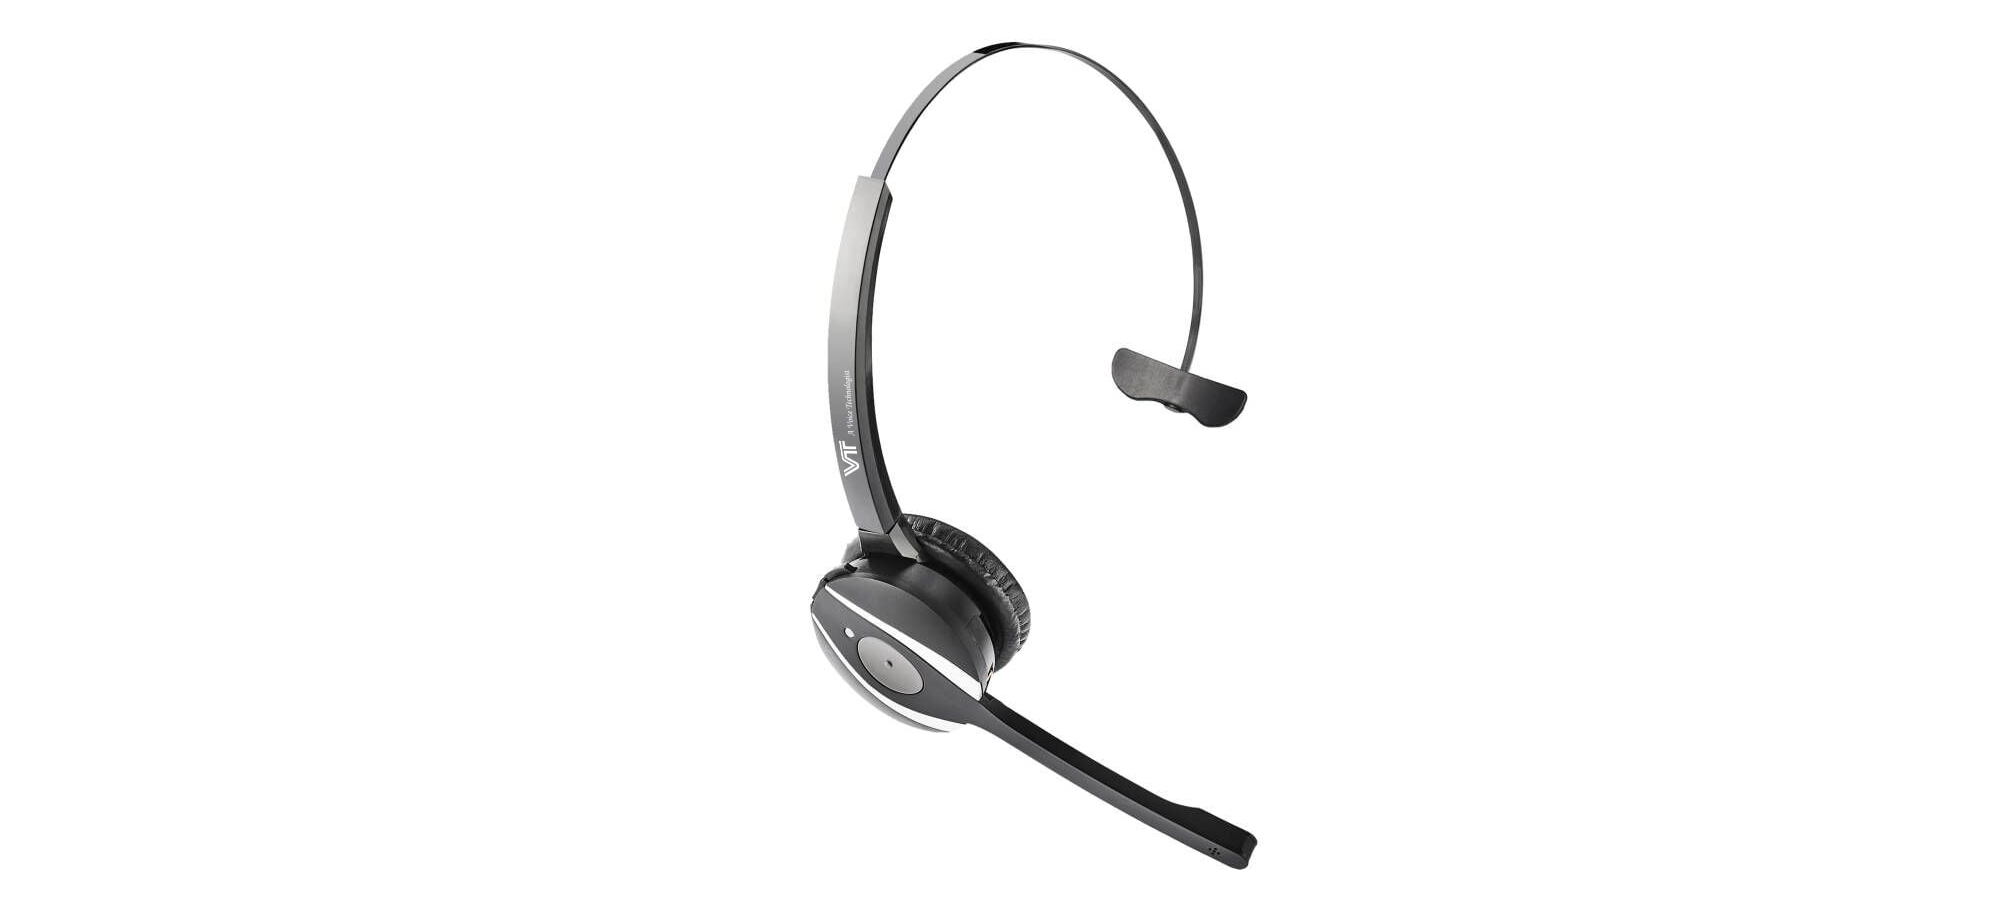 monaural headset that connects via a dongle